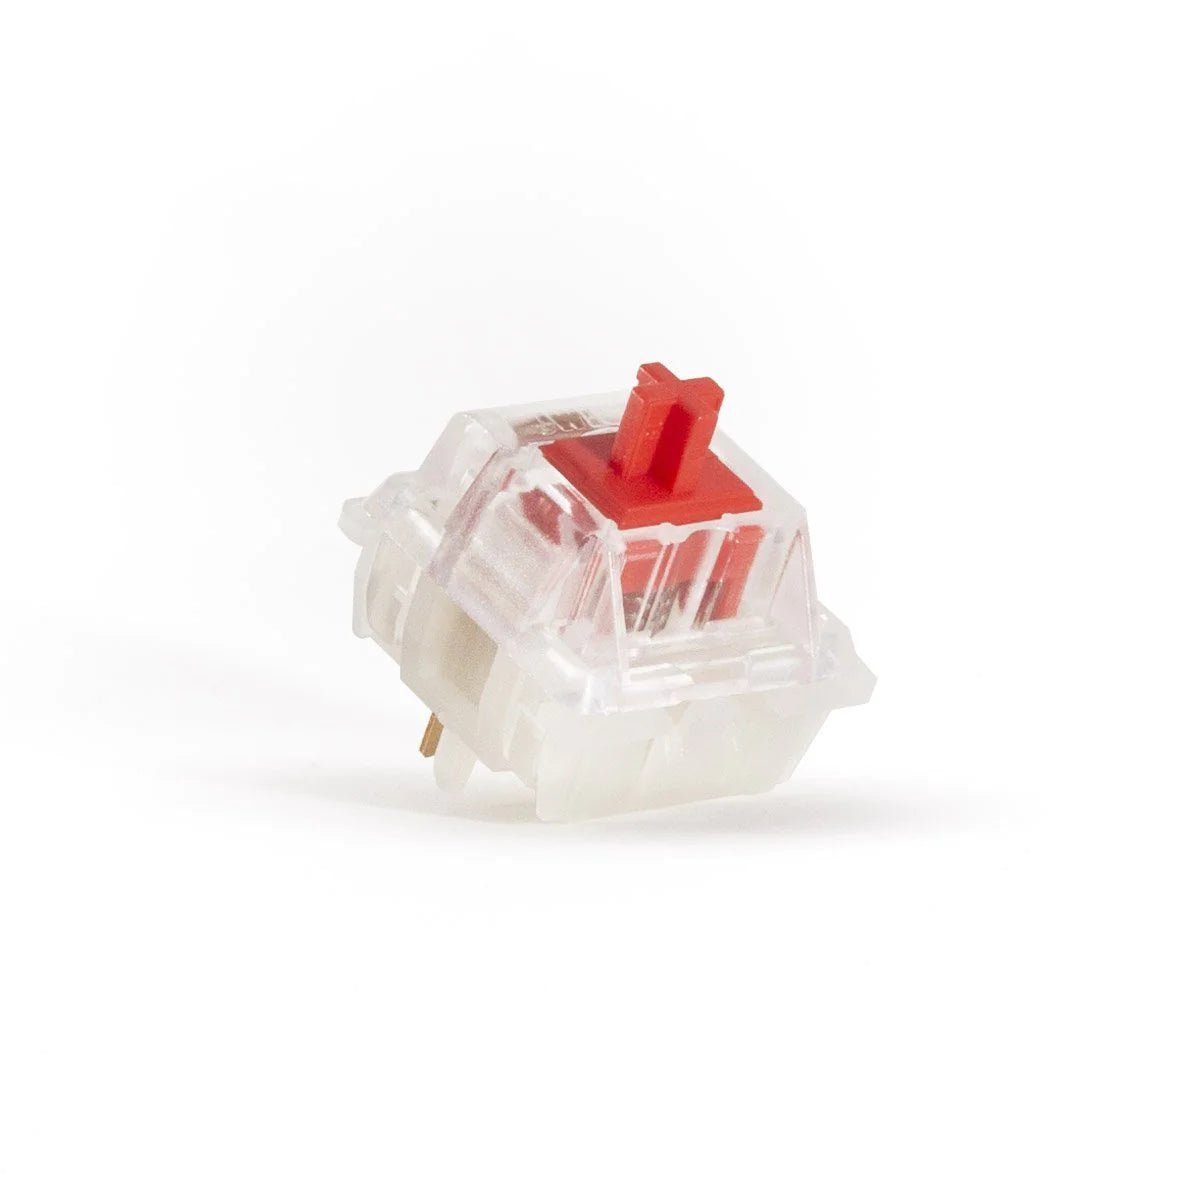 Switch-JWK Jwick Red Linear Switches (Lightly Factory Pre-Lubed) - Meow Key